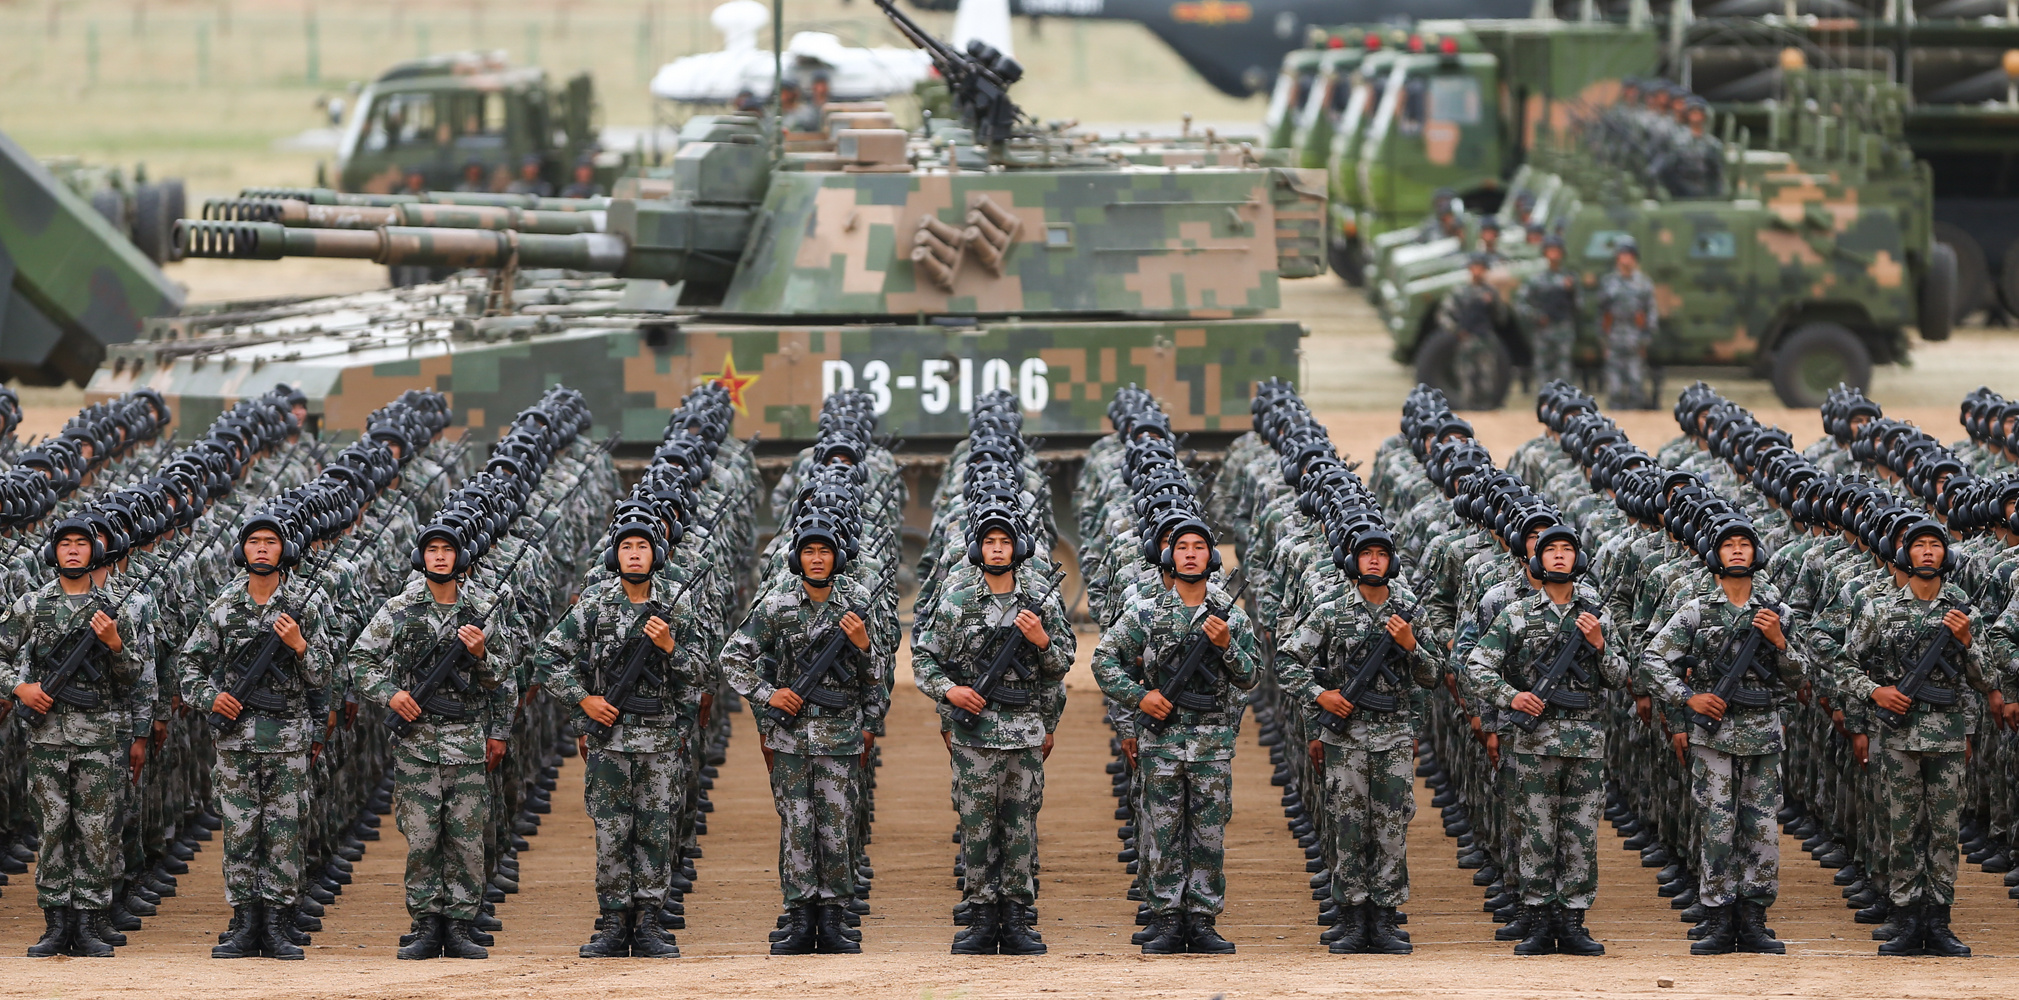 A grand military parade to mark the 90th birthday of the People's Liberation Army (PLA) is held in the Zhurihe military training base in north China's Inner Mongolia Autonomous Region on July 30, 2017. This is the first time that China commemorates the Army Day, which falls on August 1, with a military parade since the founding of the People's Republic of China in 1949. Chinese President Xi Jinping inspected the troops and delivered an important speech. 12,000 troops, more than 100 aircraft and 500 pieces of grand equipment rallied for the parade. [Photo: China Plus/Li Jin]